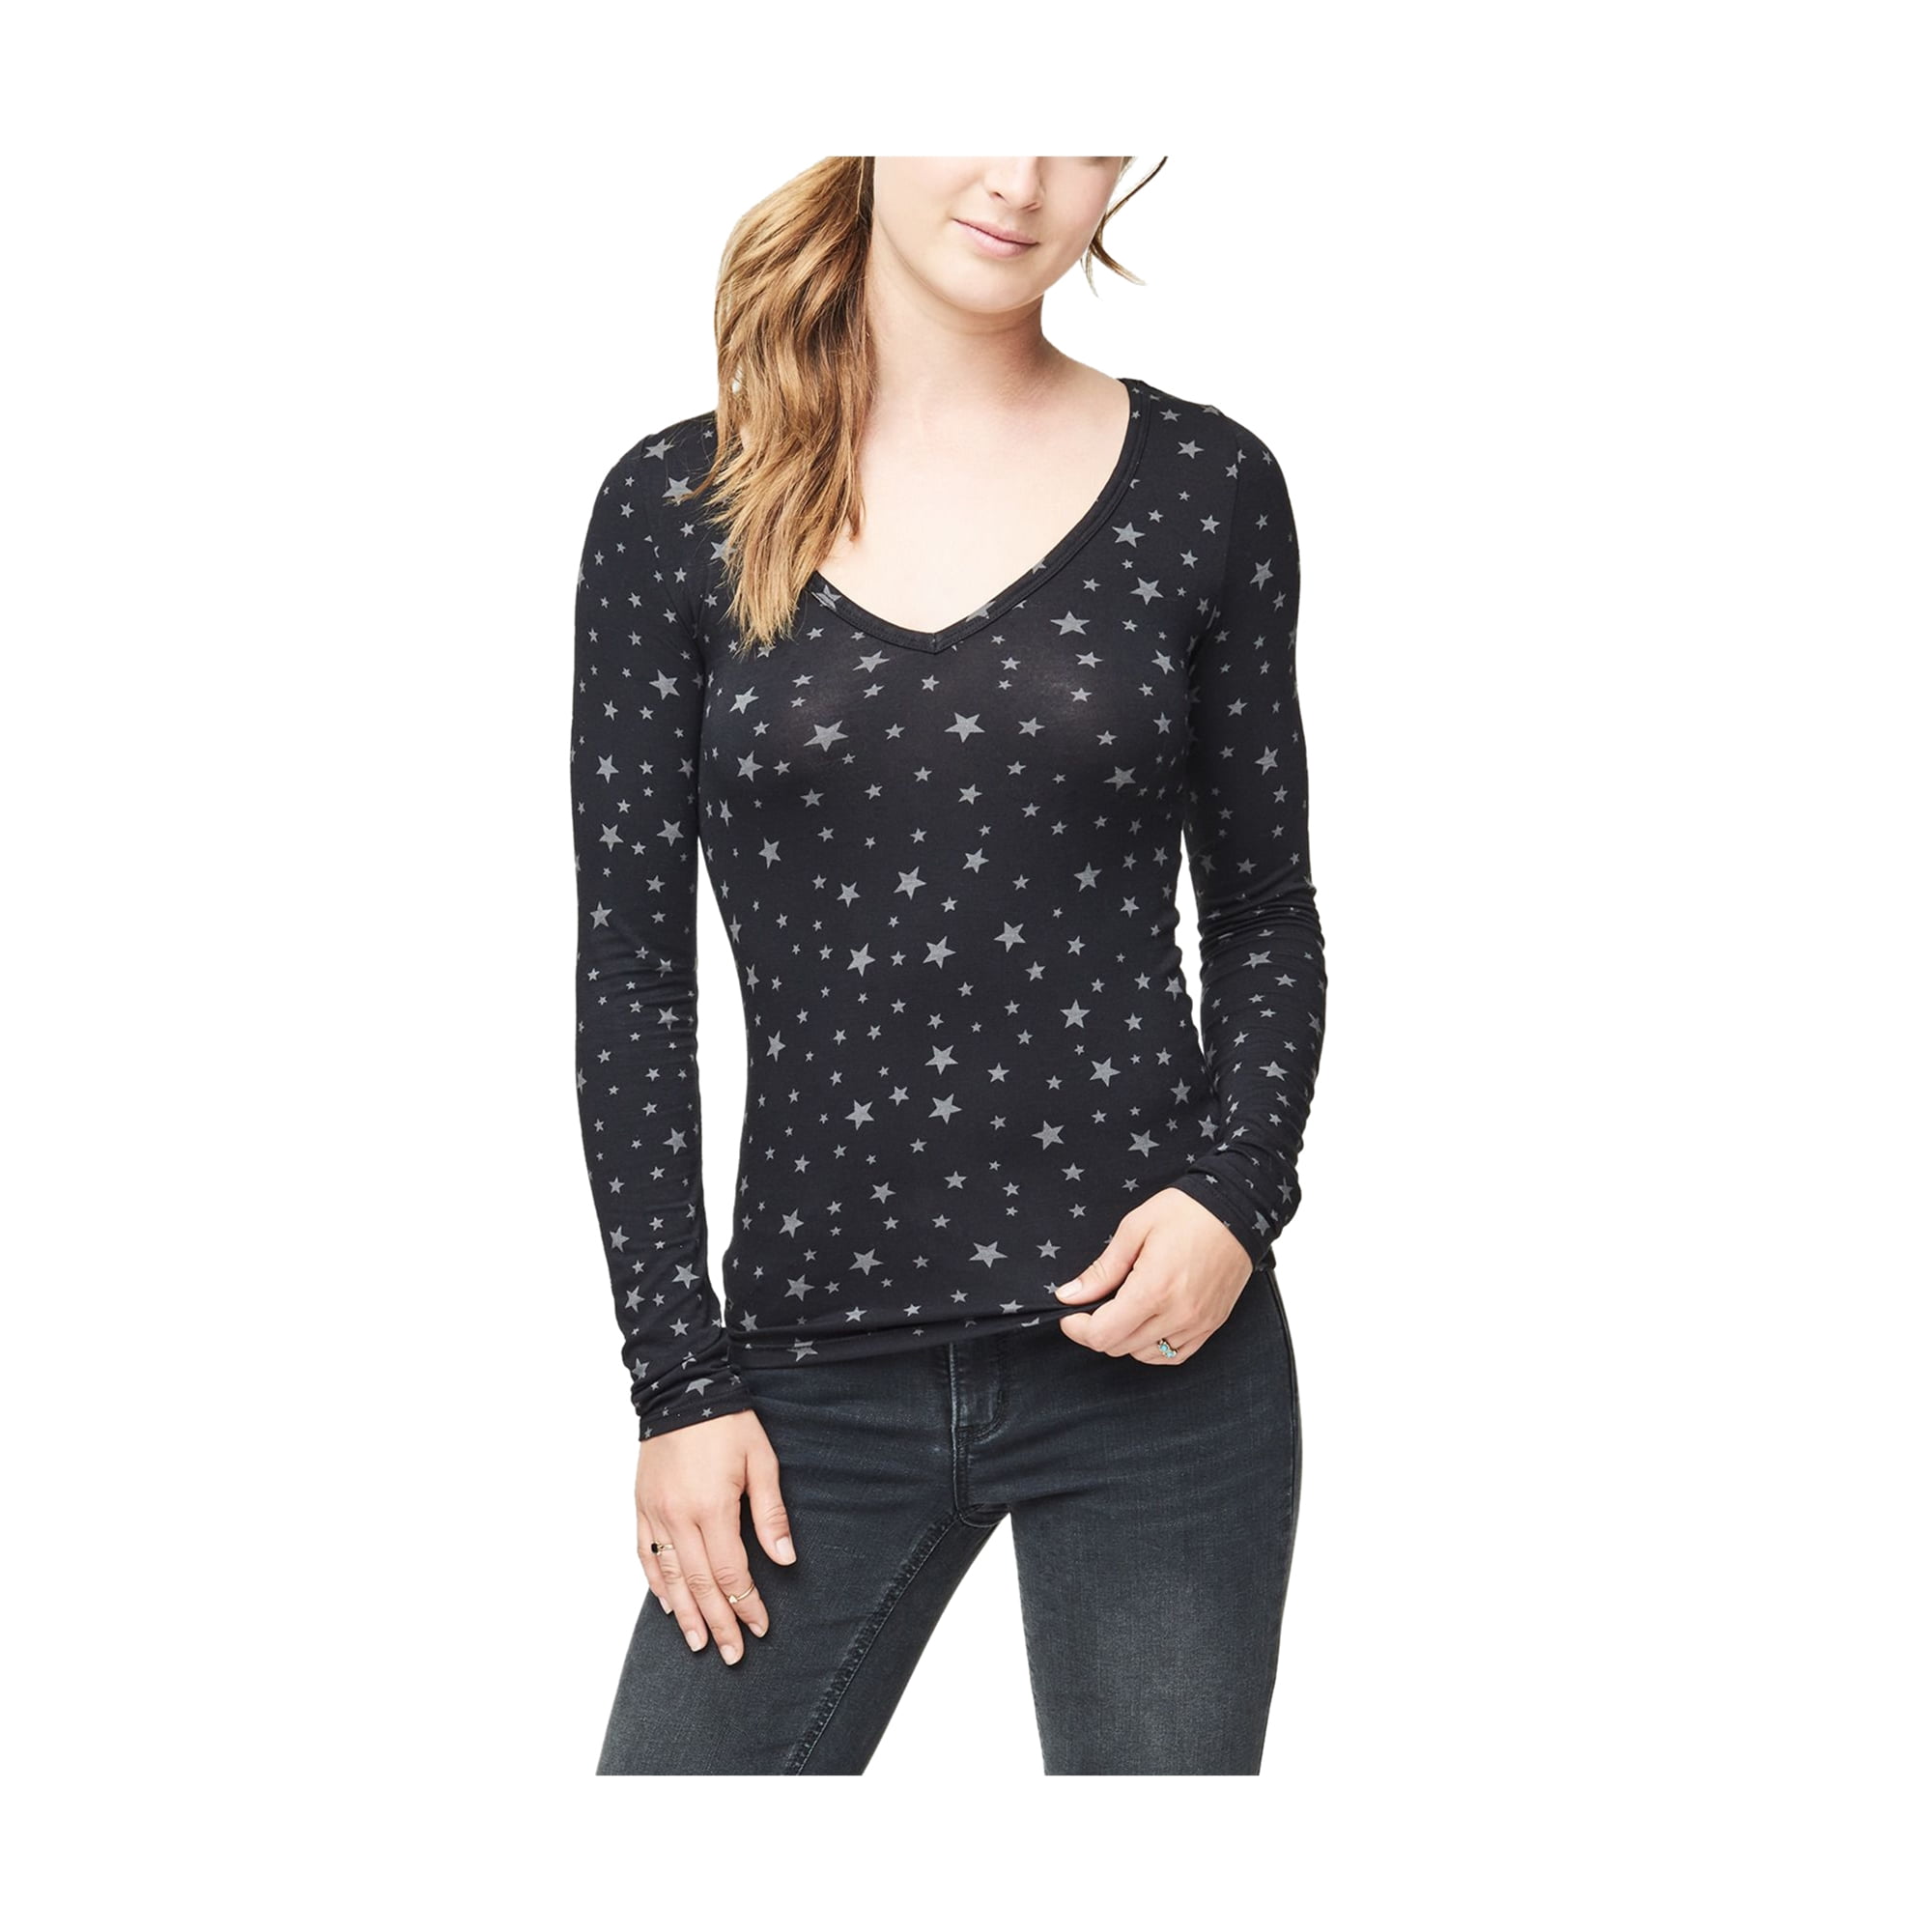 AEROPOSTALE Womens Seriously Soft Starry Graphic T-Shirt